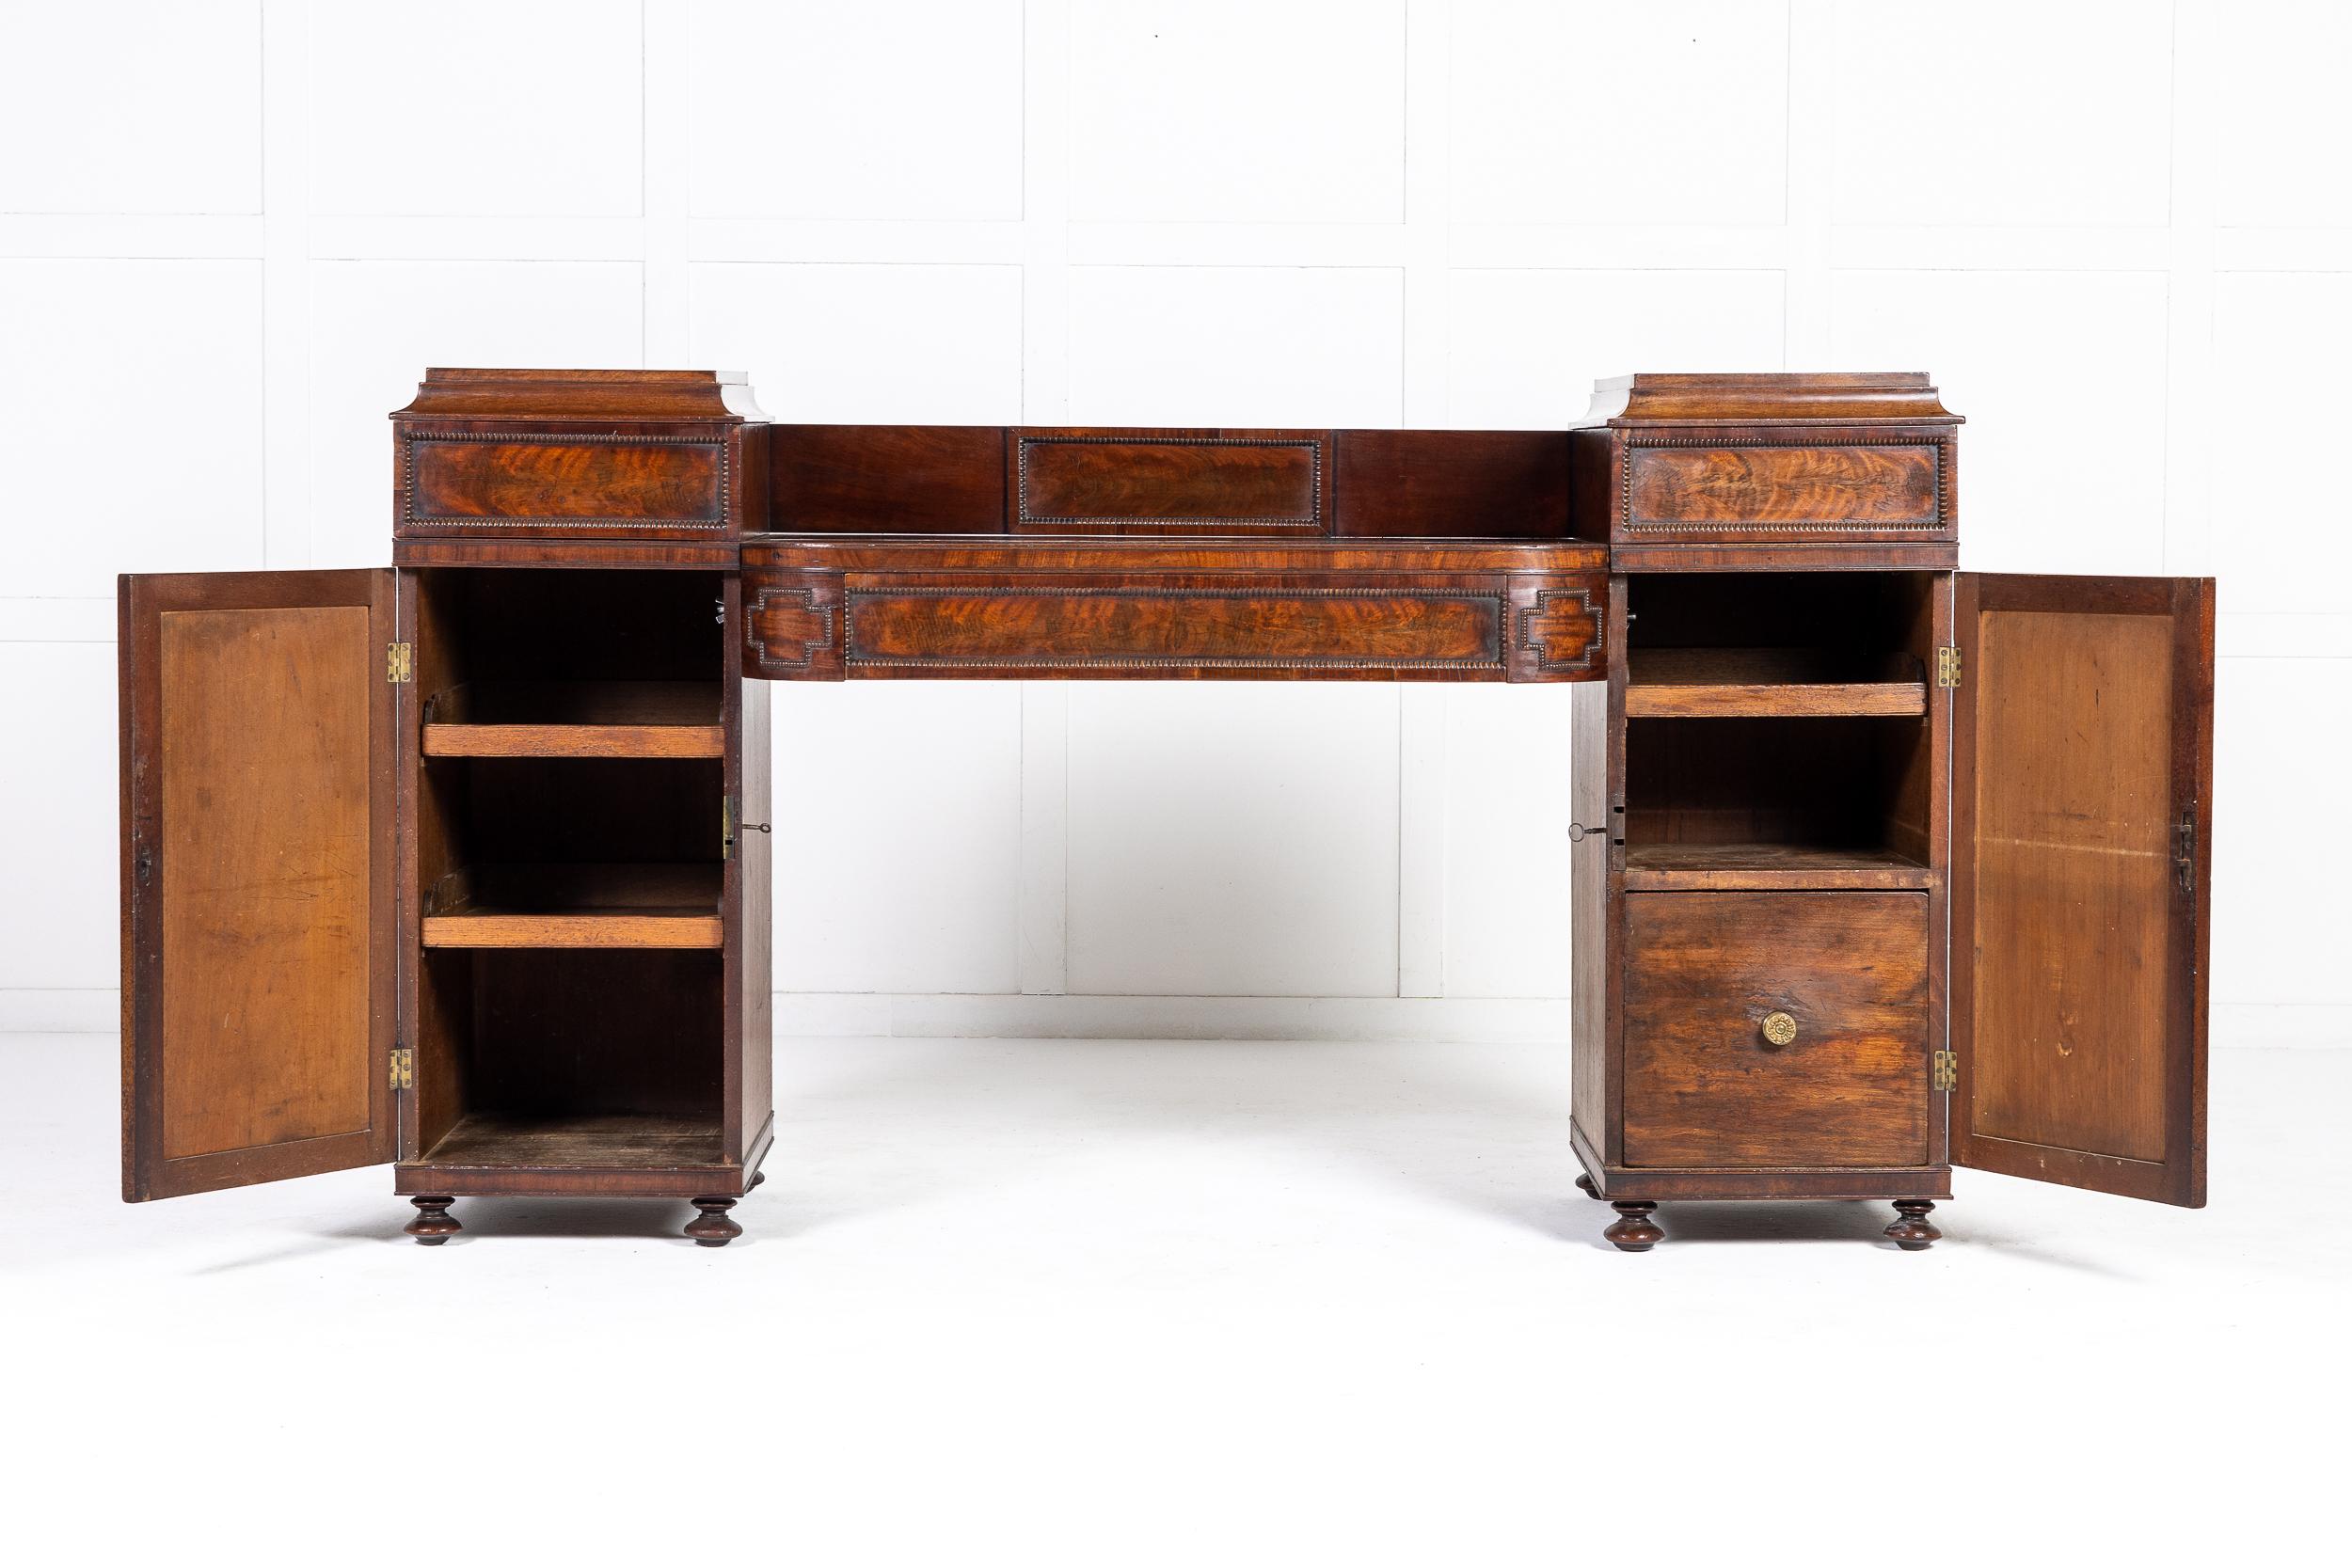 A late George IV/early William IV mahogany pedestal sideboard in the Regency classical taste in the manner of gillows c.1830
Of finely figured mahogany with panelled detailing and carved beaded mouldings. These mouldings are typical of those used by